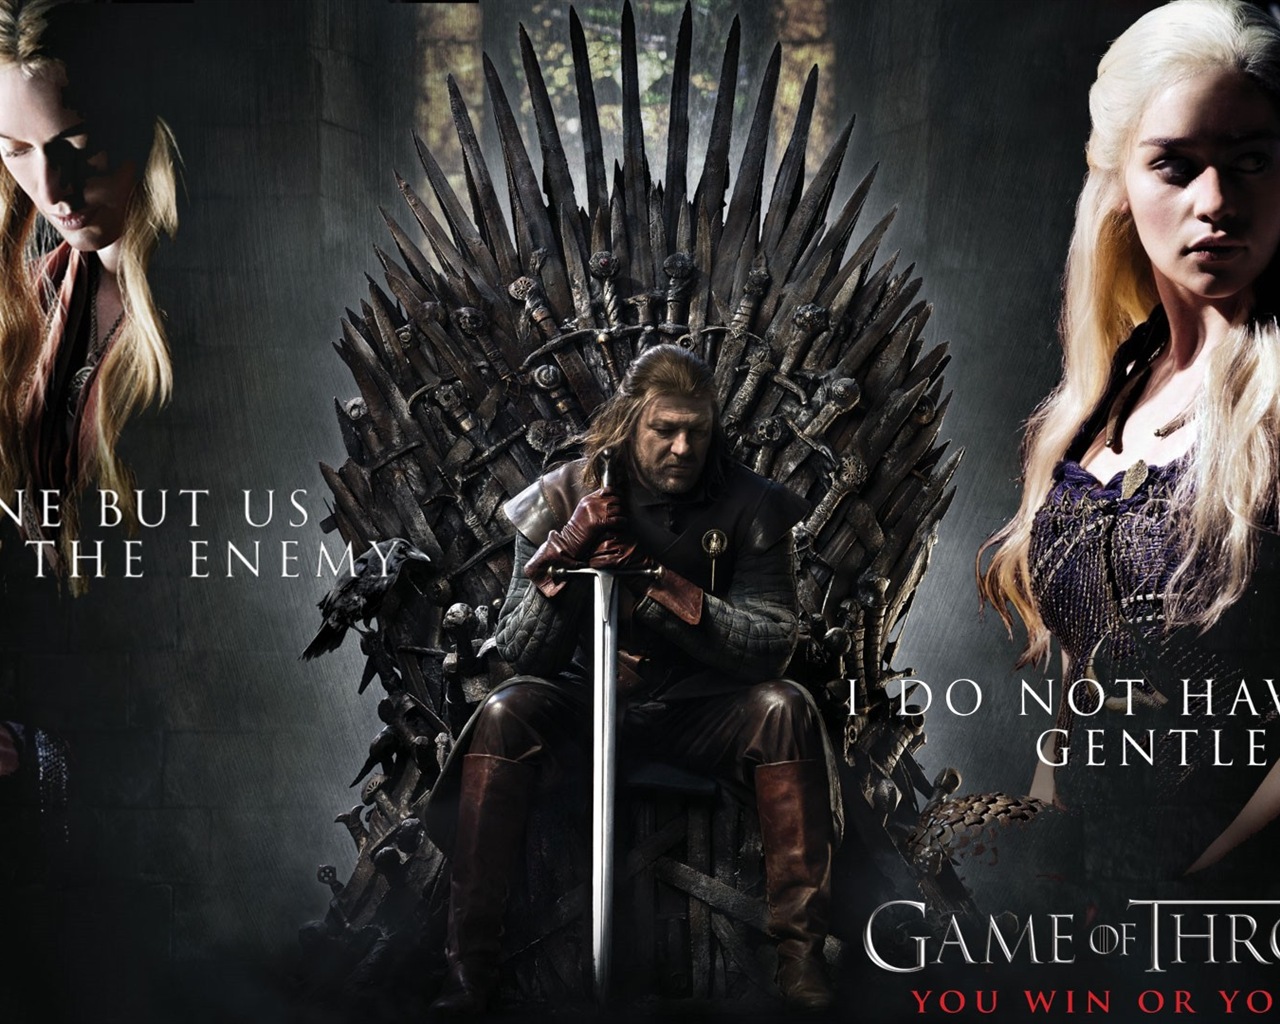 A Song of Ice and Fire: Game of Thrones HD wallpapers #9 - 1280x1024